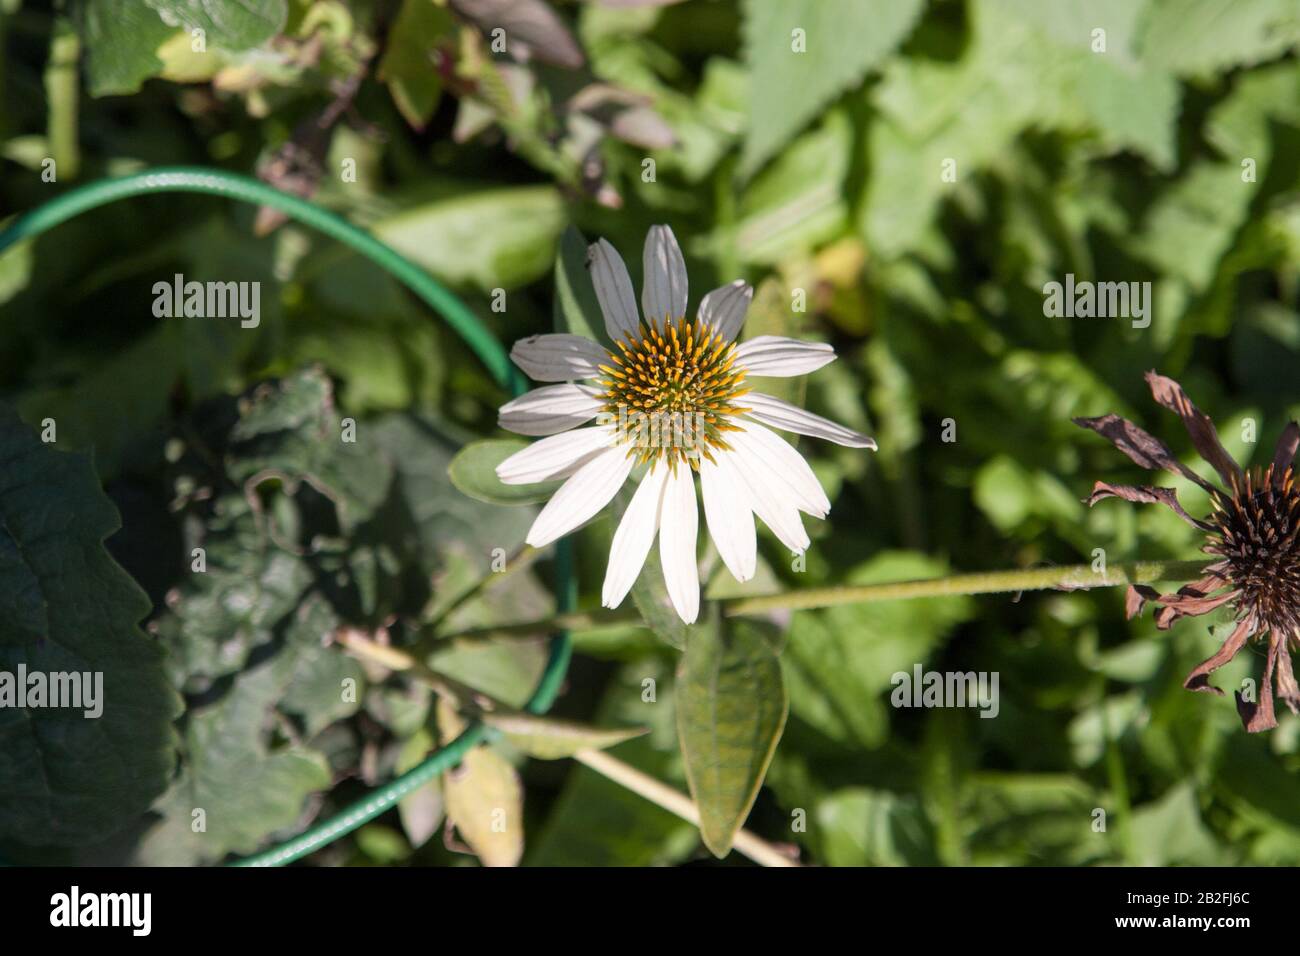 White Echinacea on green background at outdoors. Stock Photo